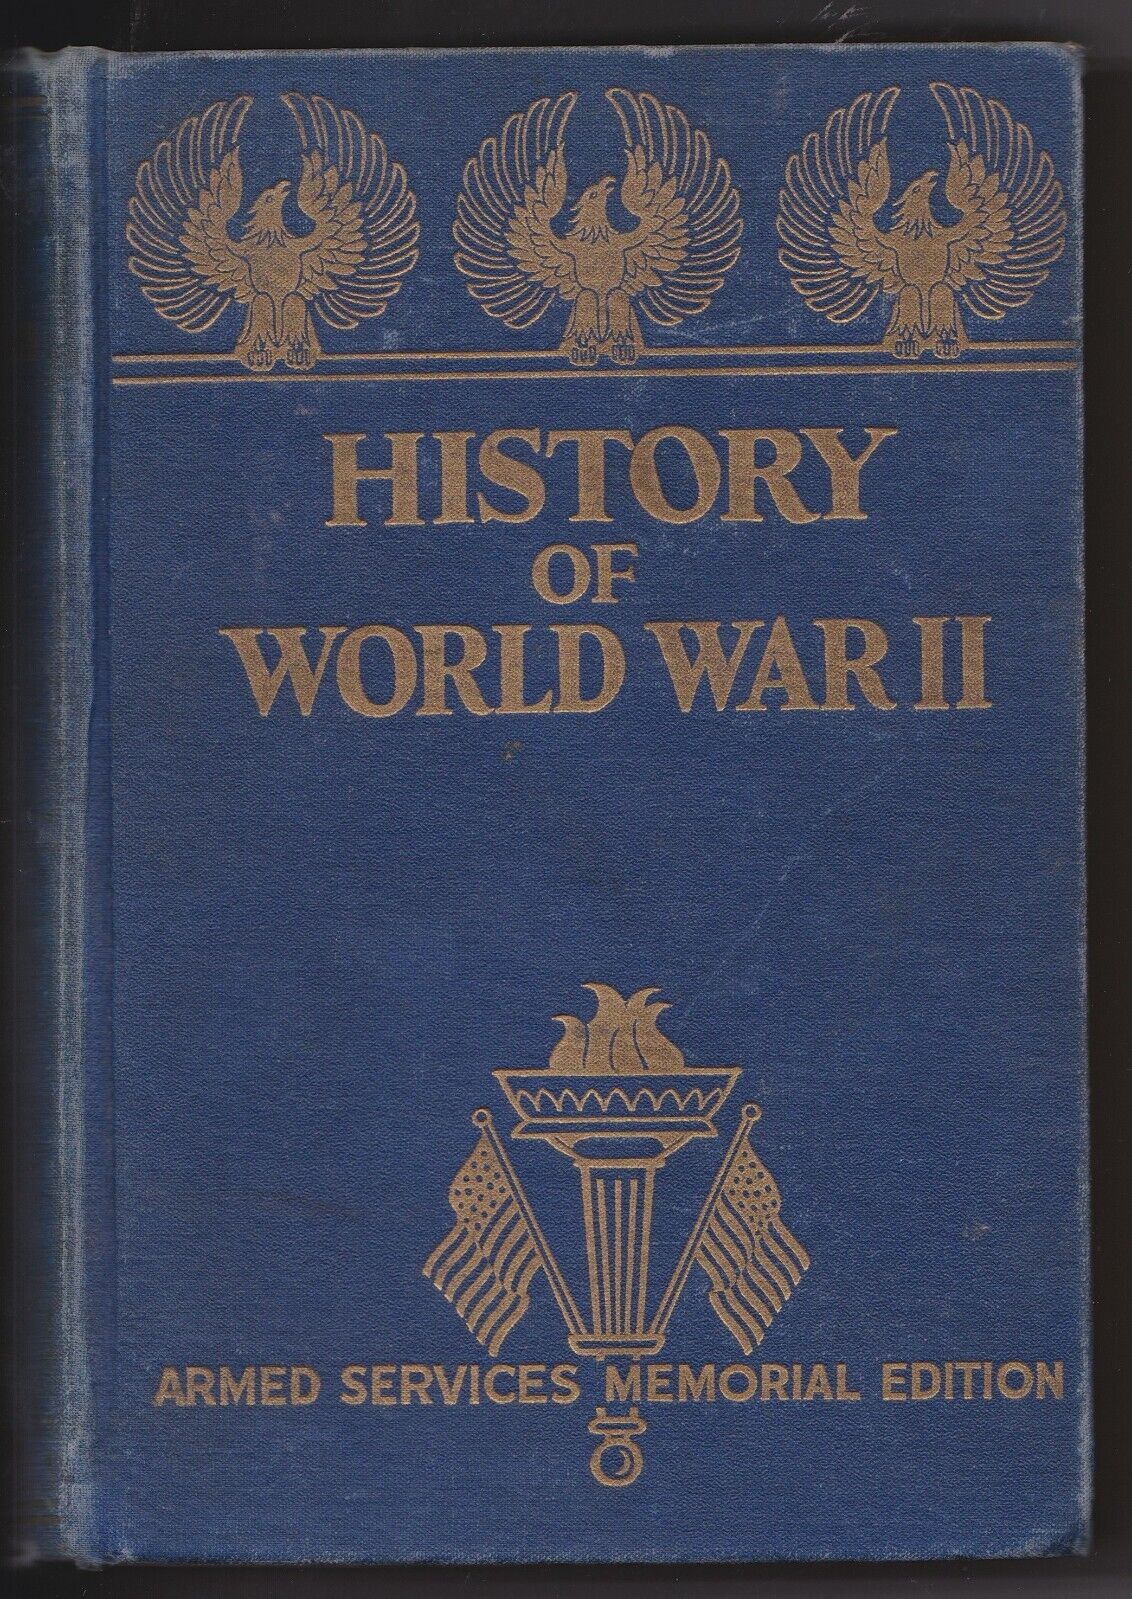 HISTORY of WORLD WAR II ARMED SERVICES MEMORIAL EDITION 1945 - HARDCOVER